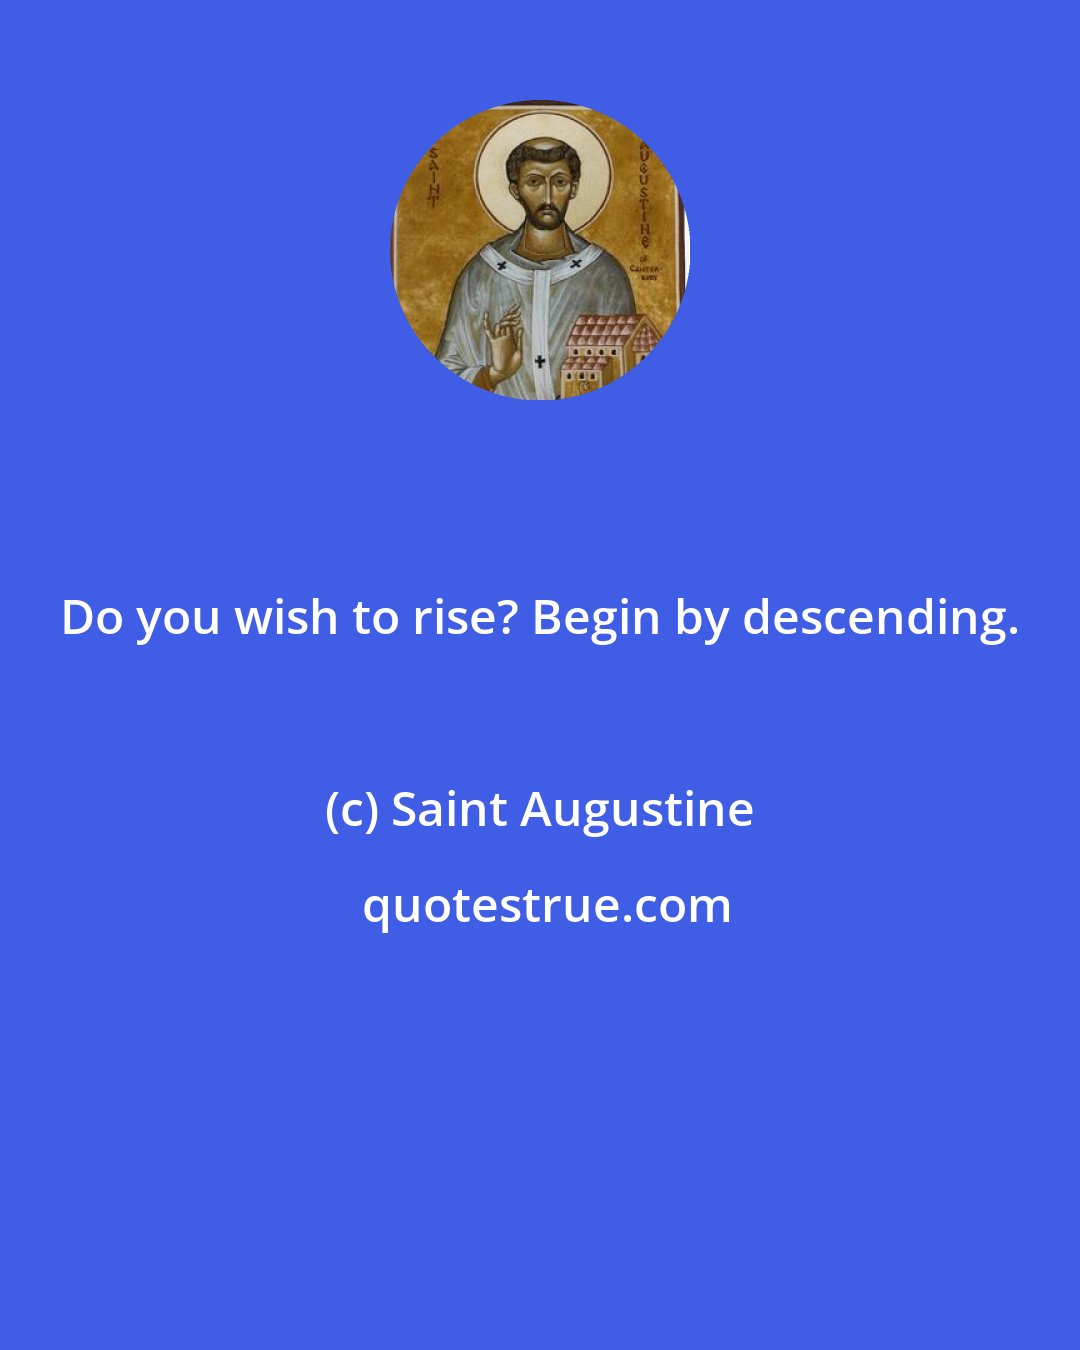 Saint Augustine: Do you wish to rise? Begin by descending.